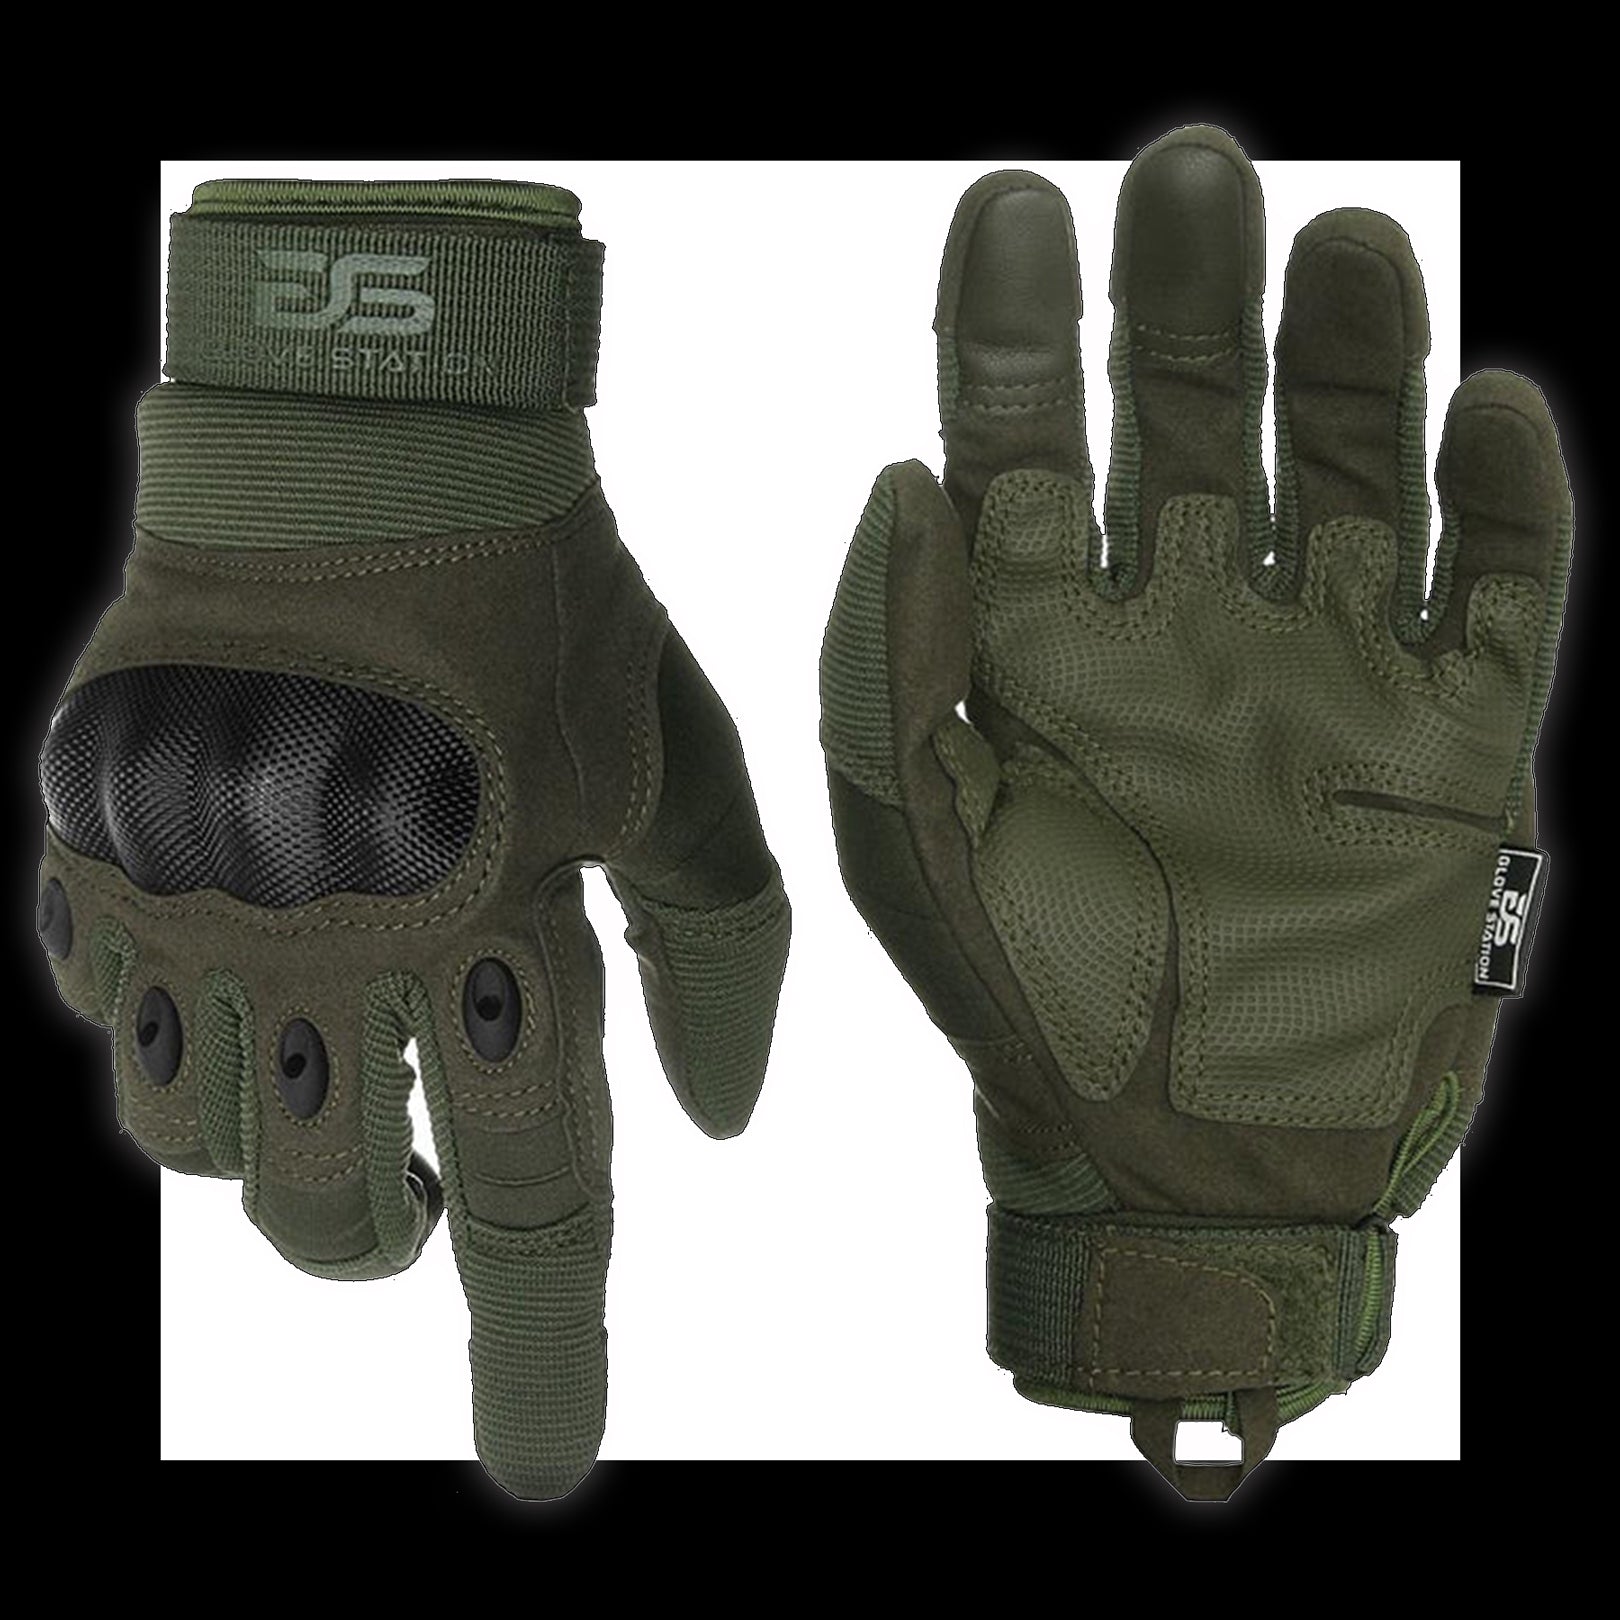 The Combat - Green - 1 Pair – Glove Station